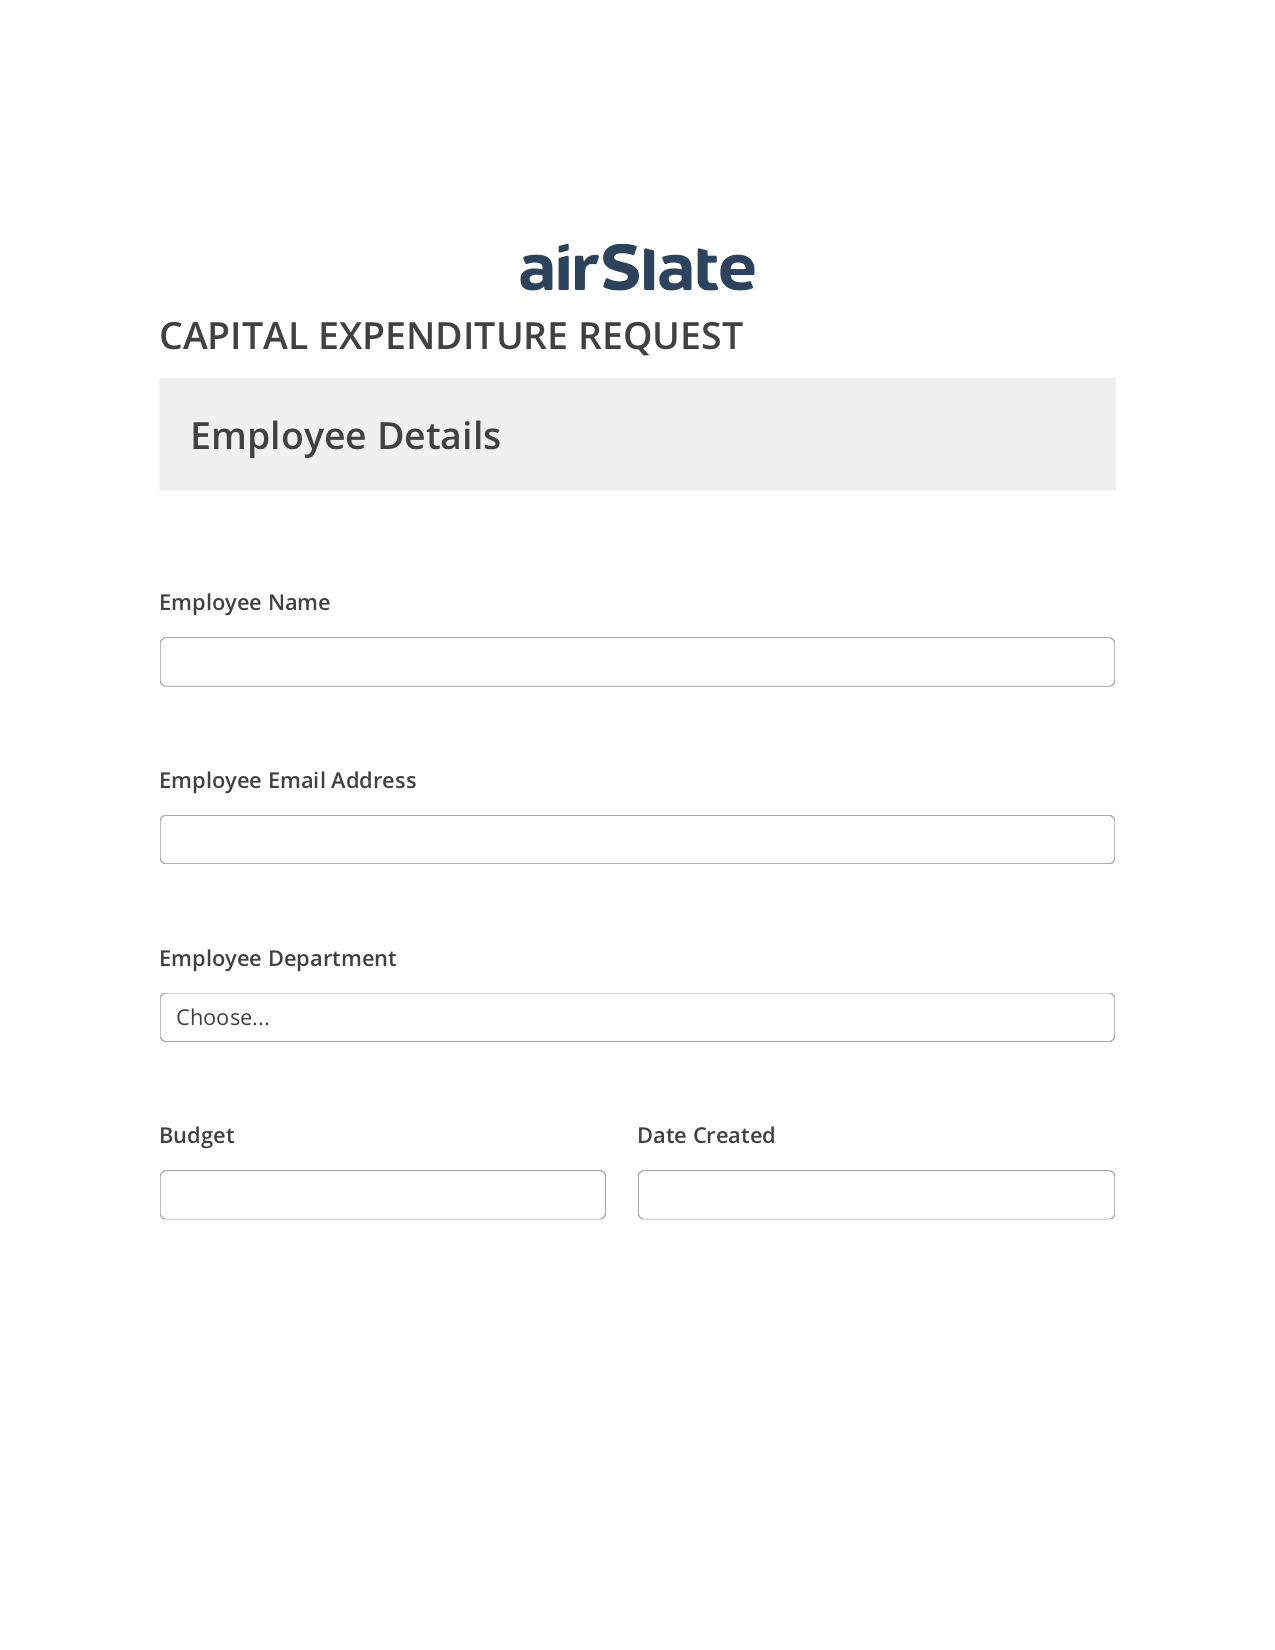 Capital Expenditure Request Approval Workflow Pre-fill Document Bot, Rename Slate Bot, Export to NetSuite